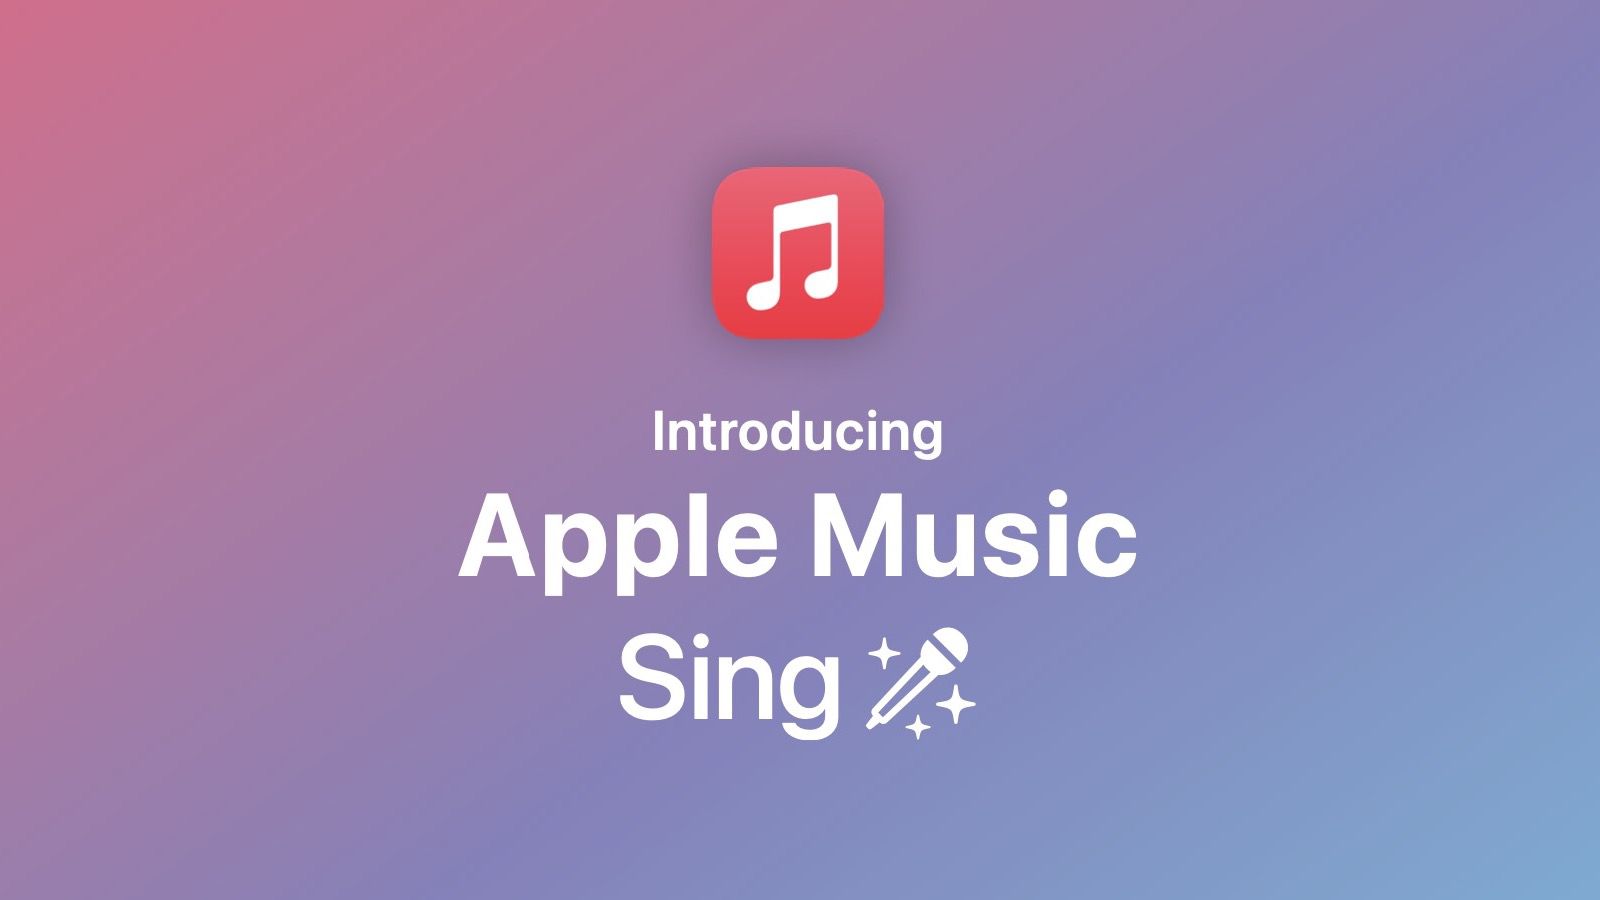 iOS 16.2: How to Use the Apple Music Sing Karaoke Feature